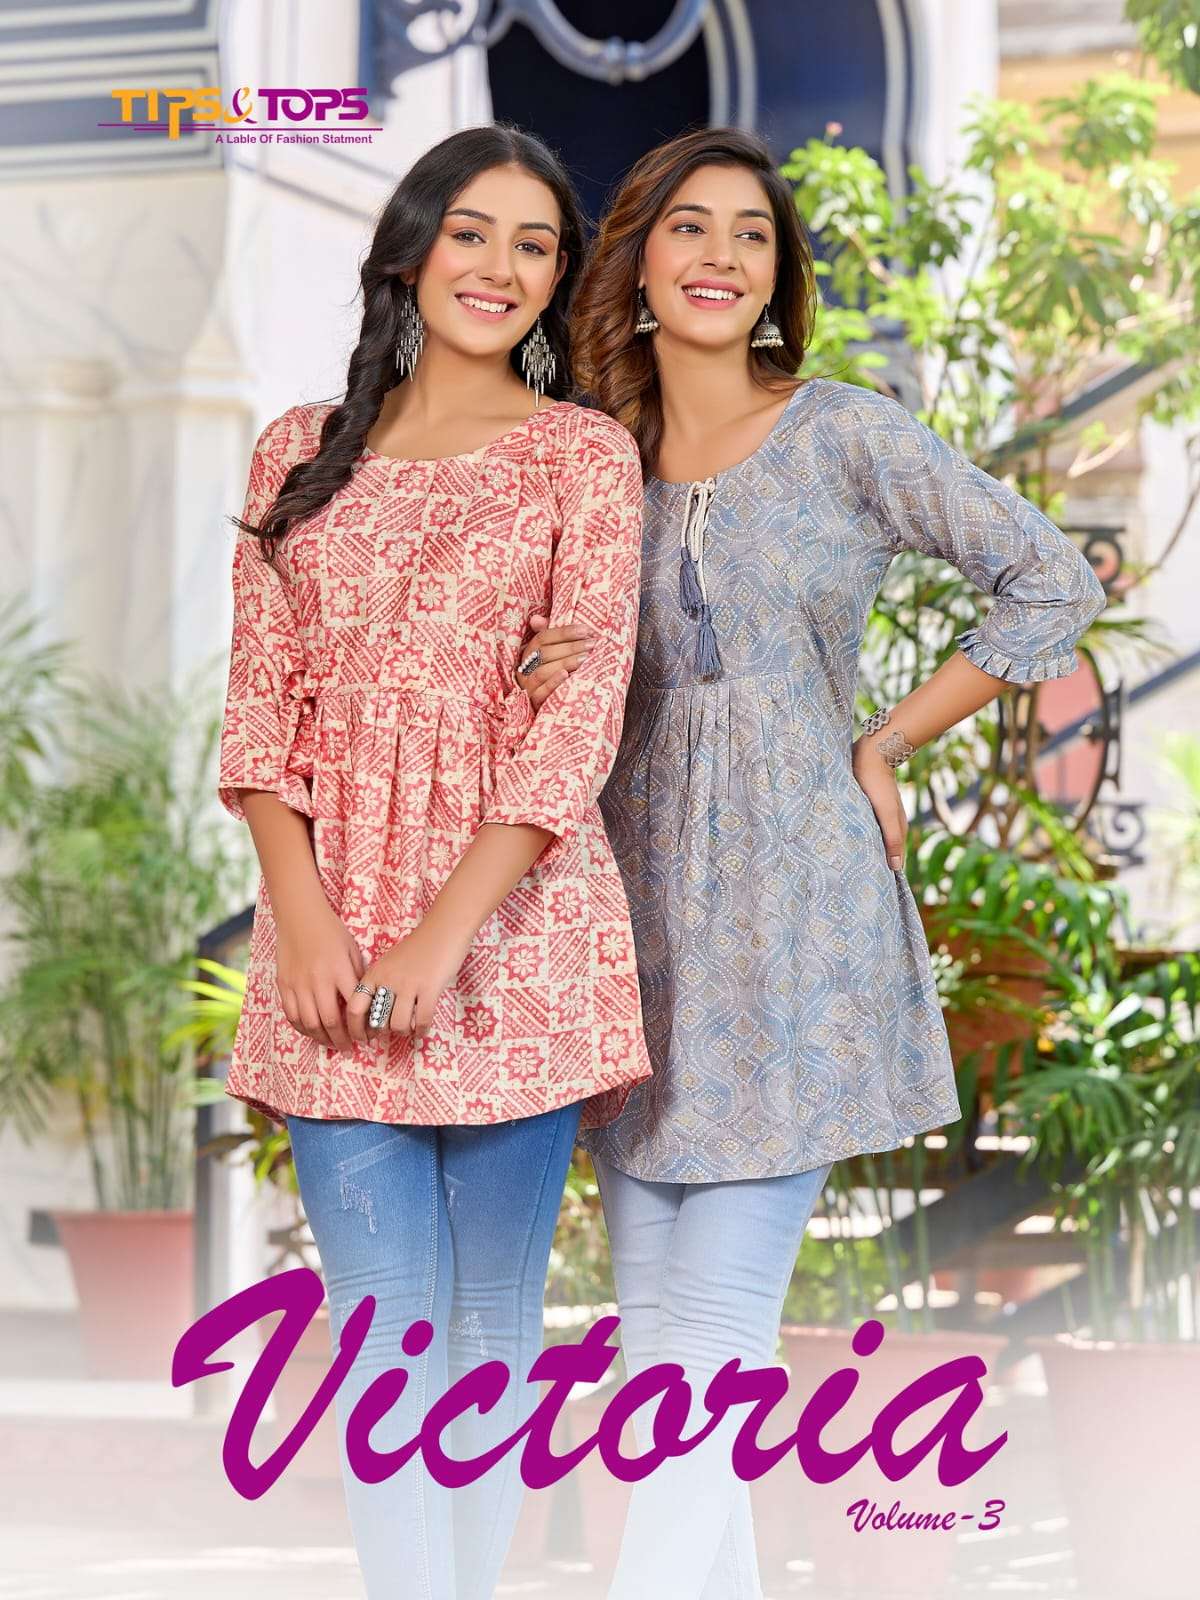 TIPS & TOPS VICTORIA VOL 3 NEW HEAVY FANCY DESIGNER RAYON CAPSULE FOIL PRINTED SHORT TOP WESTERN COLLECTION WHOLESALER